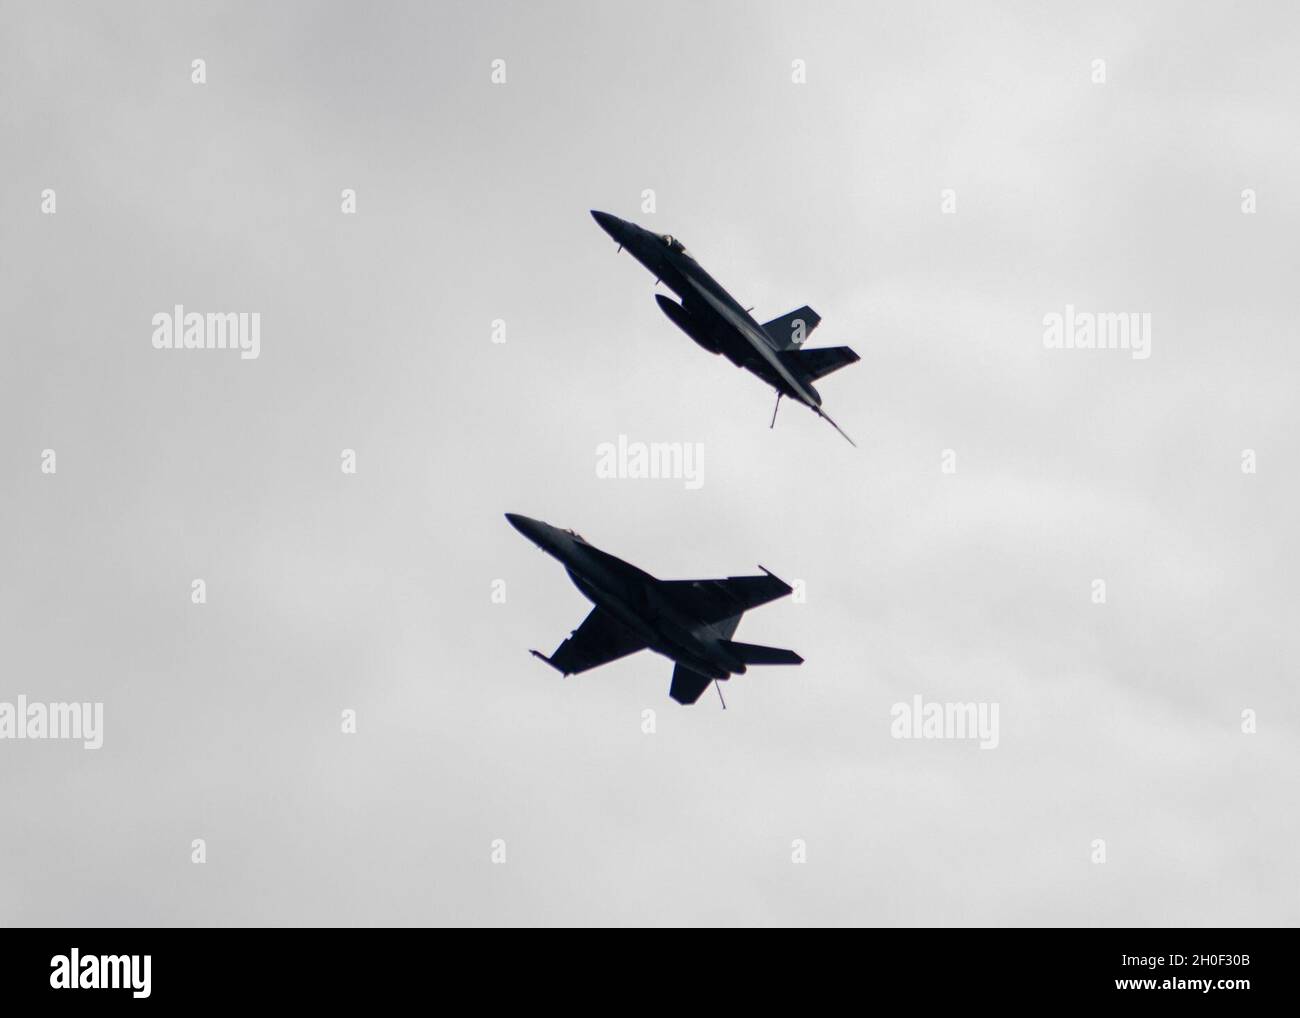 PACIFIC OCEAN (Feb. 20, 2021) - Two F/A-18E Super Hornets, assigned to the “Golden Warriors” of Strike Fighter Squadron (VFA) 87, fly over the aircraft carrier USS Theodore Roosevelt (CVN 71) Feb 20, 2021. The Theodore Roosevelt Carrier Strike Group is on a scheduled deployment to the U.S. 7th Fleet area of operations. As the U.S. Navy’s largest forward-deployed fleet, 7th Fleet routinely operates and interacts with 35 maritime nations while conducting missions to preserve and protect a free and open Indo-Pacific Region. Stock Photo